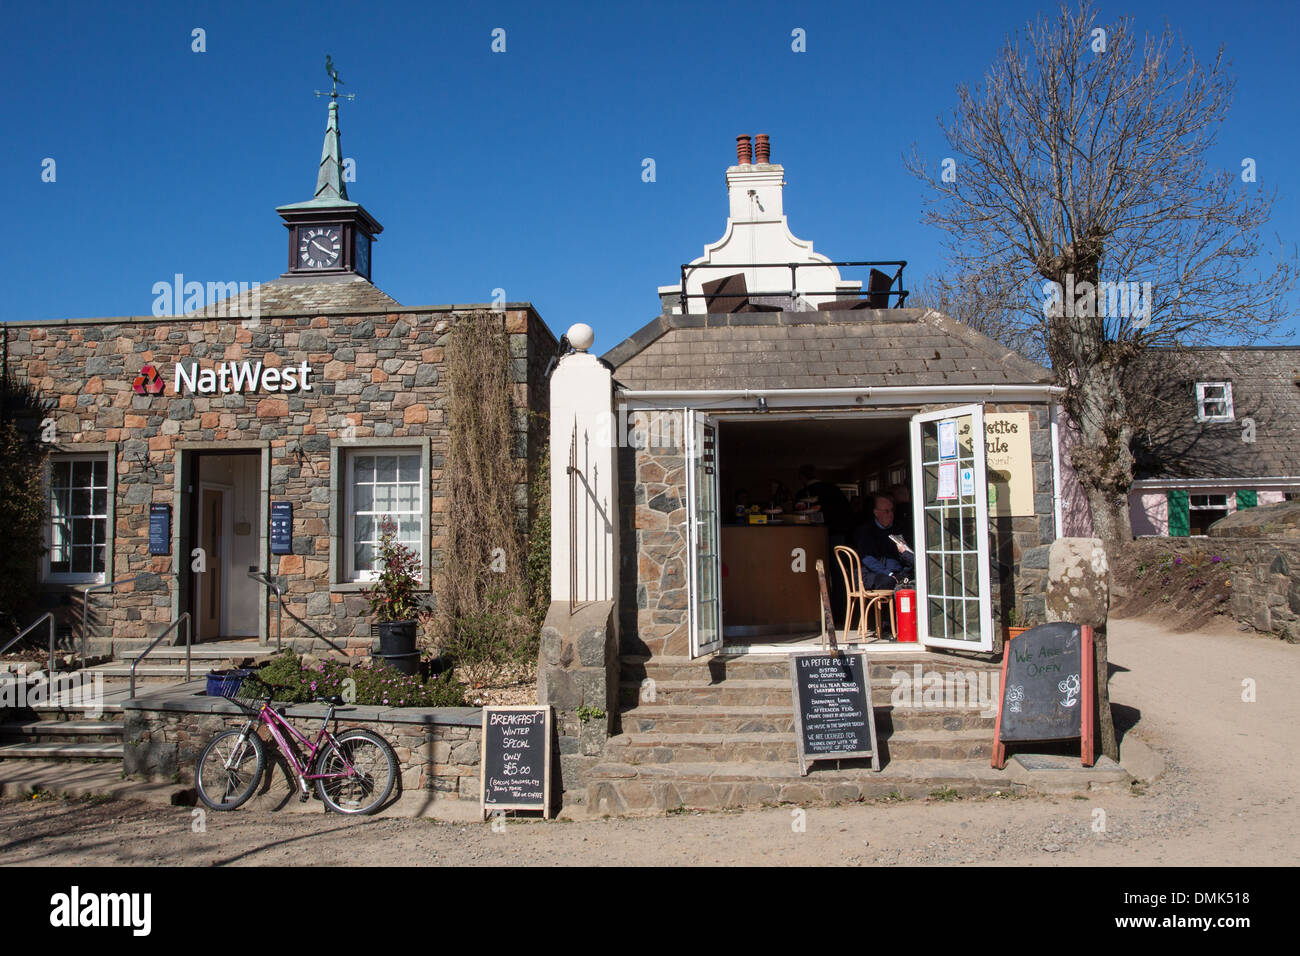 TOWN CENTRE OF SARK WITH A CAFE RESTAURANT AND A BRANCH OF THE BANK NATIONAL WEST, TAX HAVEN, ISLAND OF SARK, CHANNEL ISLANDS Stock Photo